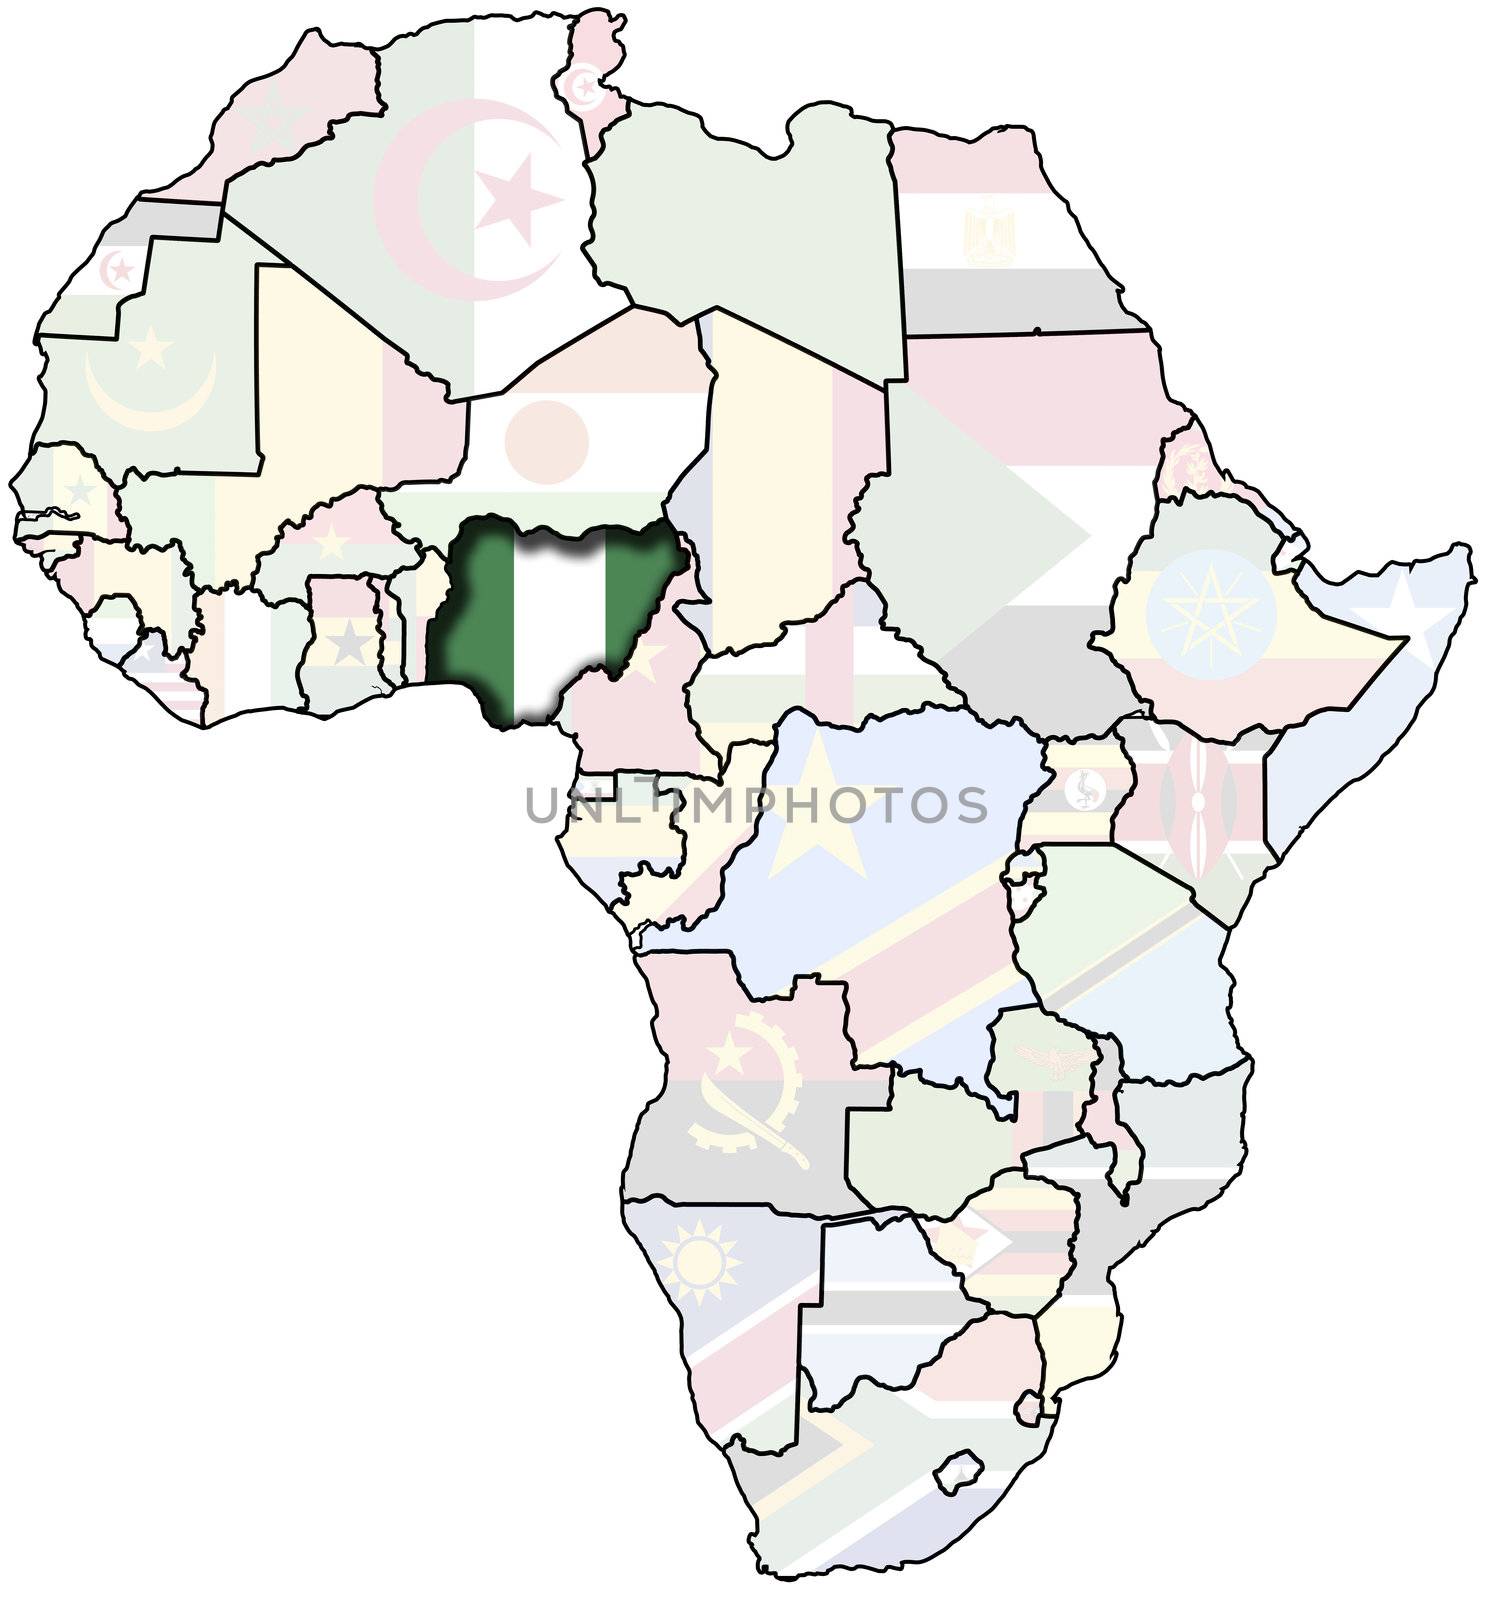 nigeria on africa map with flags